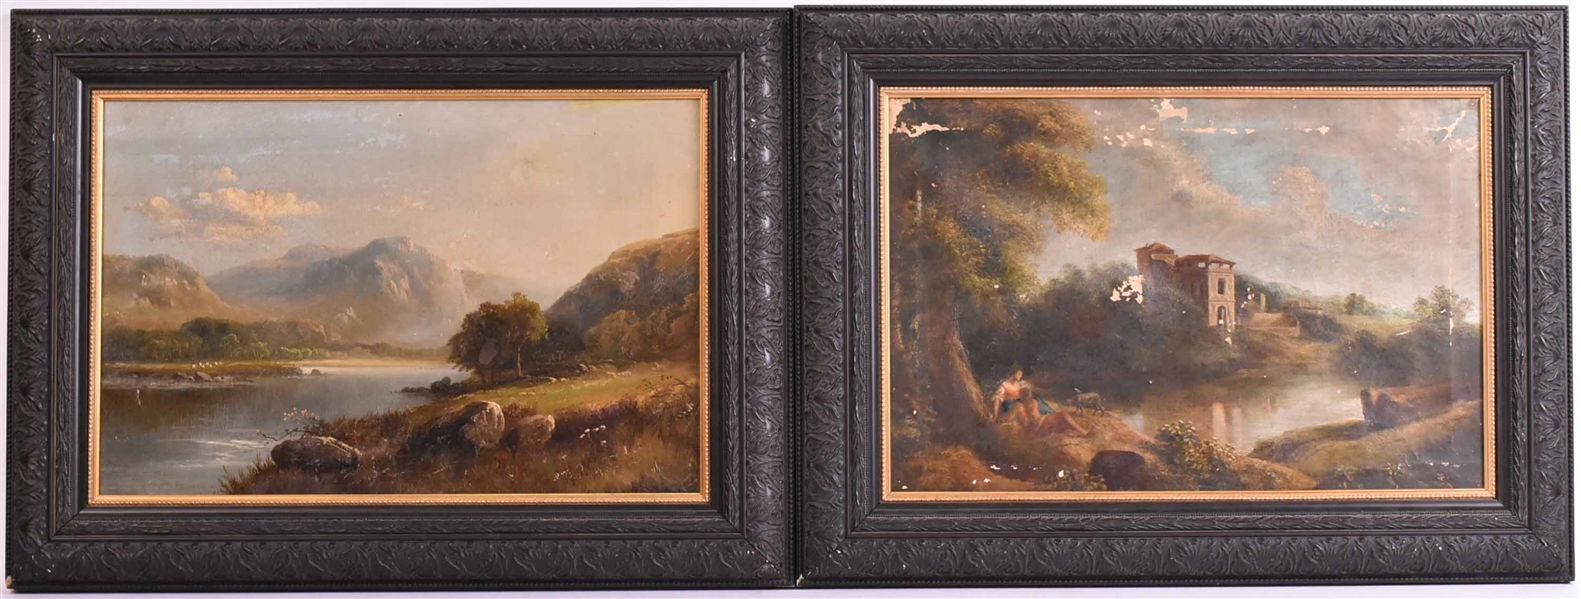 Pair of Oil on Canvas English Landscapes